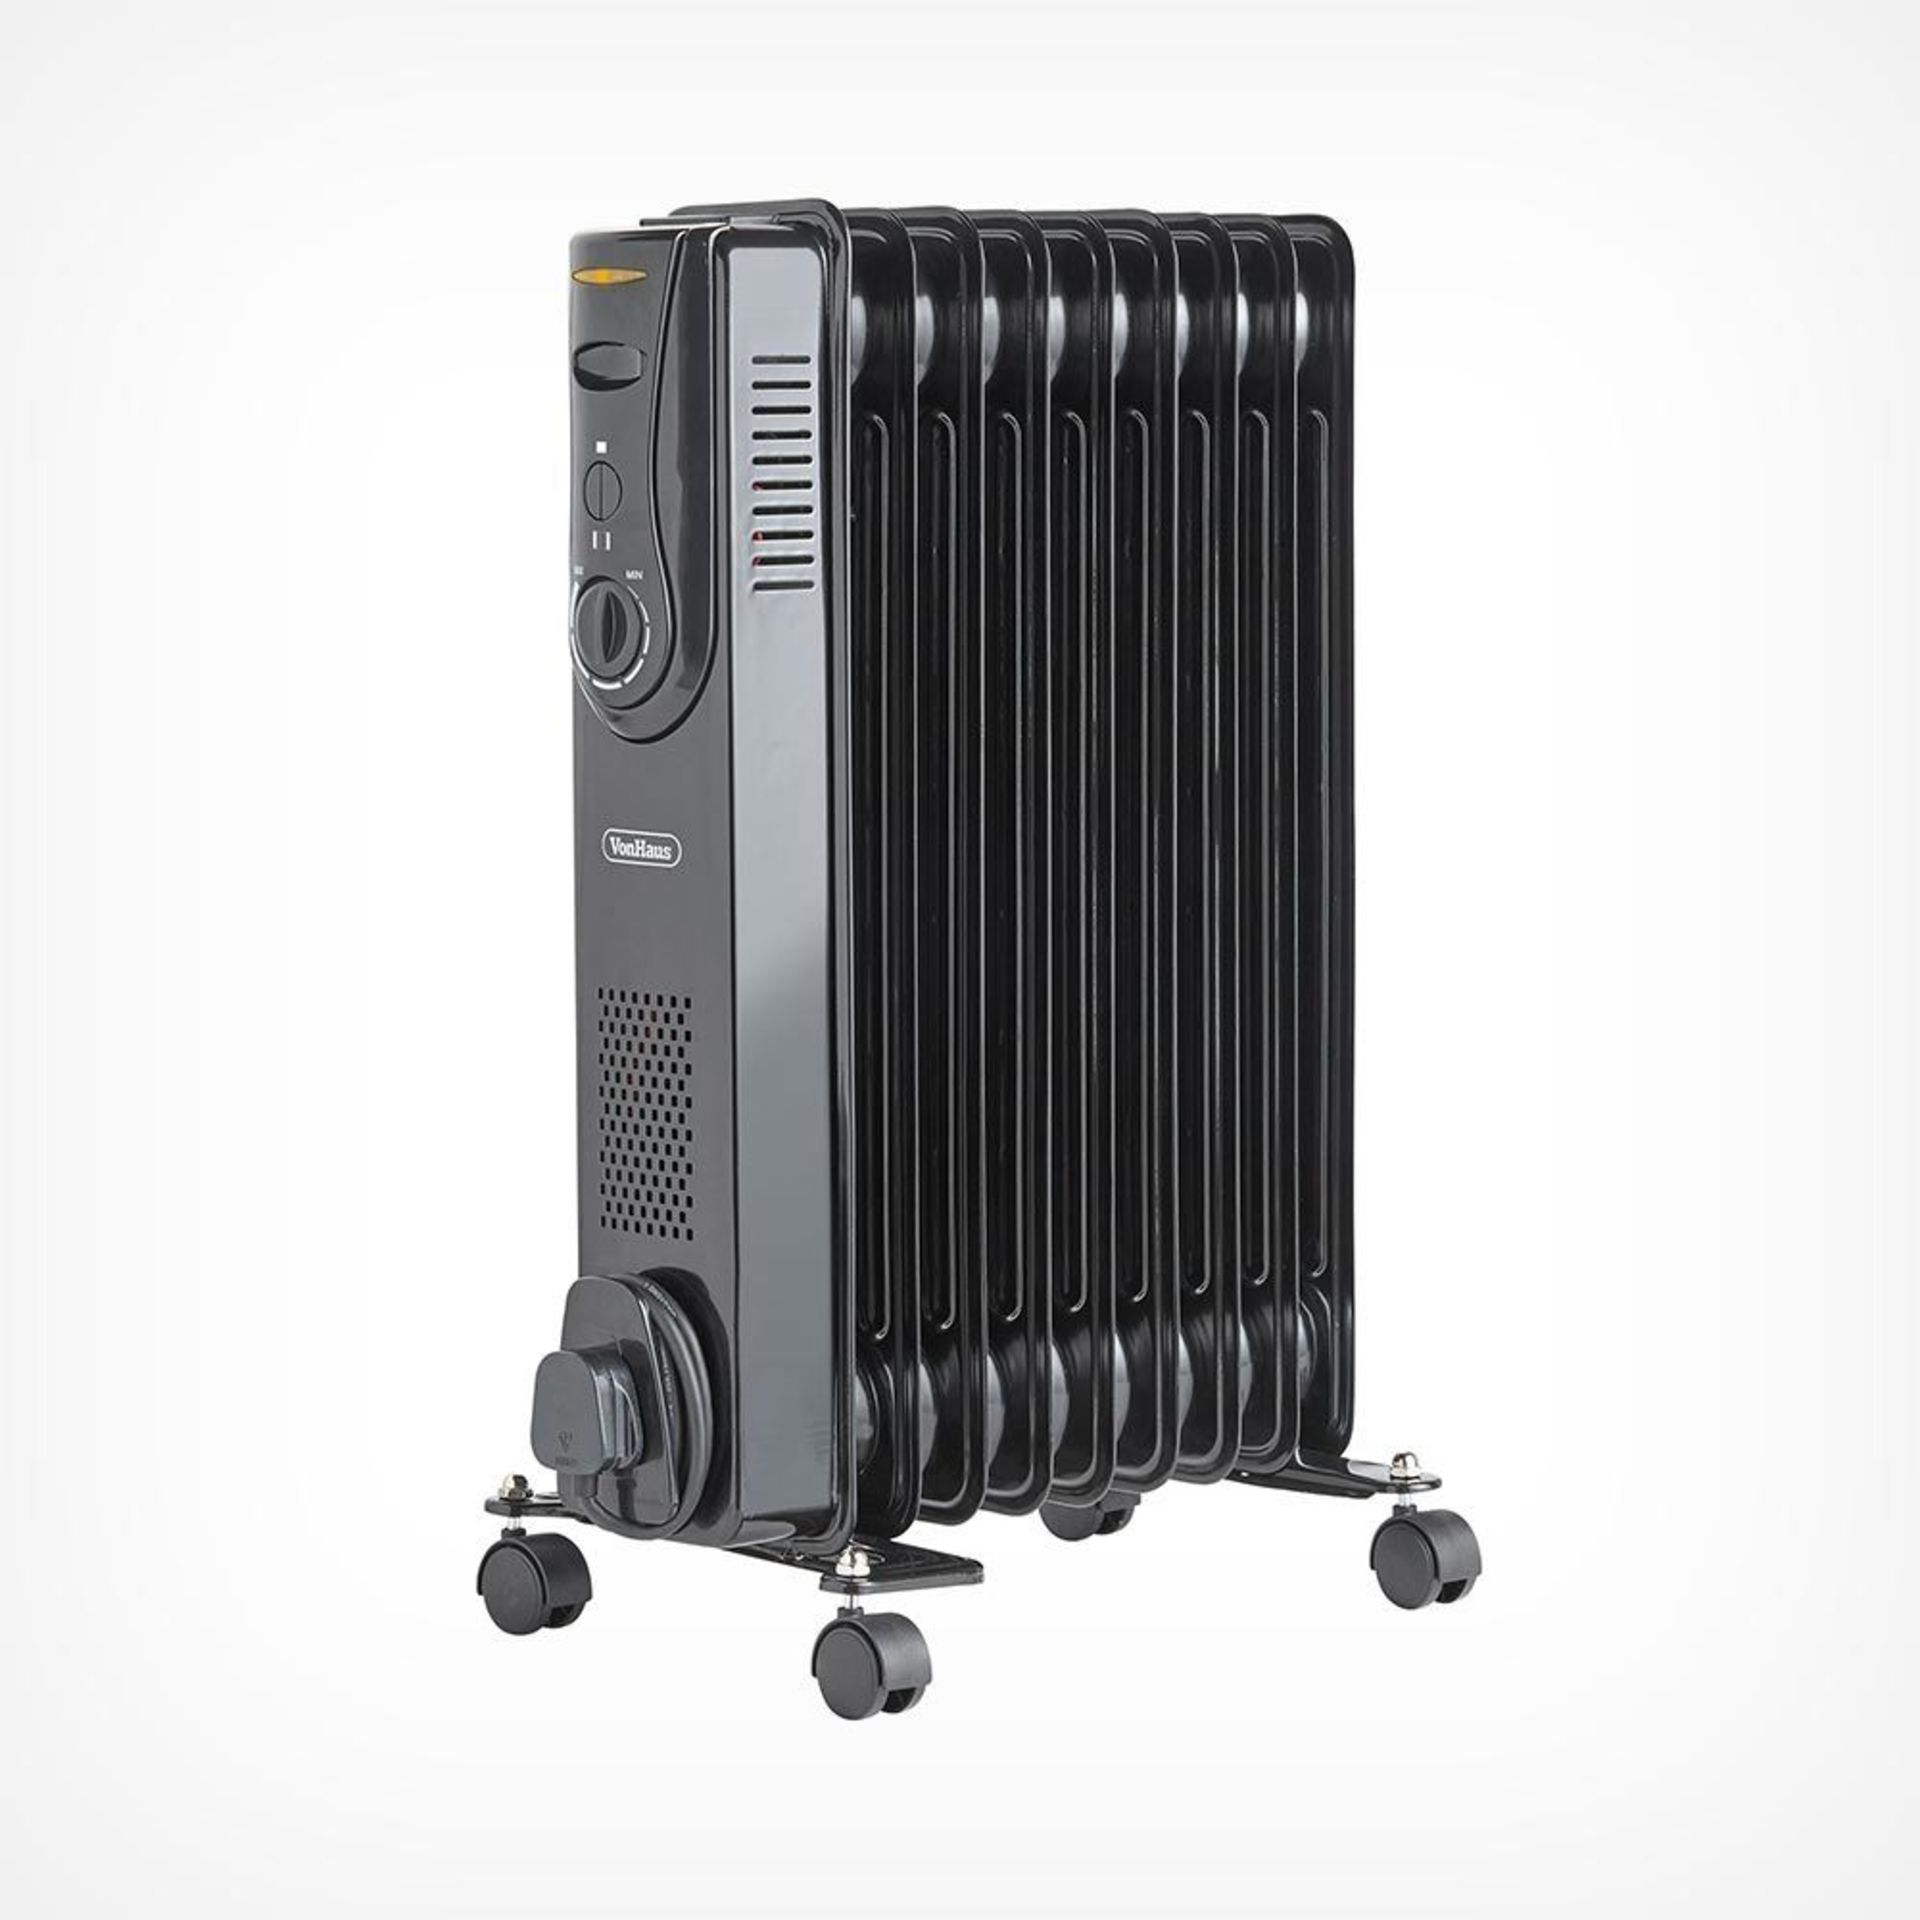 (CP107) 9 Fin 2000W Oil Filled Radiator - Black Powerful 2000W radiator with 9 oil-filled fins... - Image 4 of 4